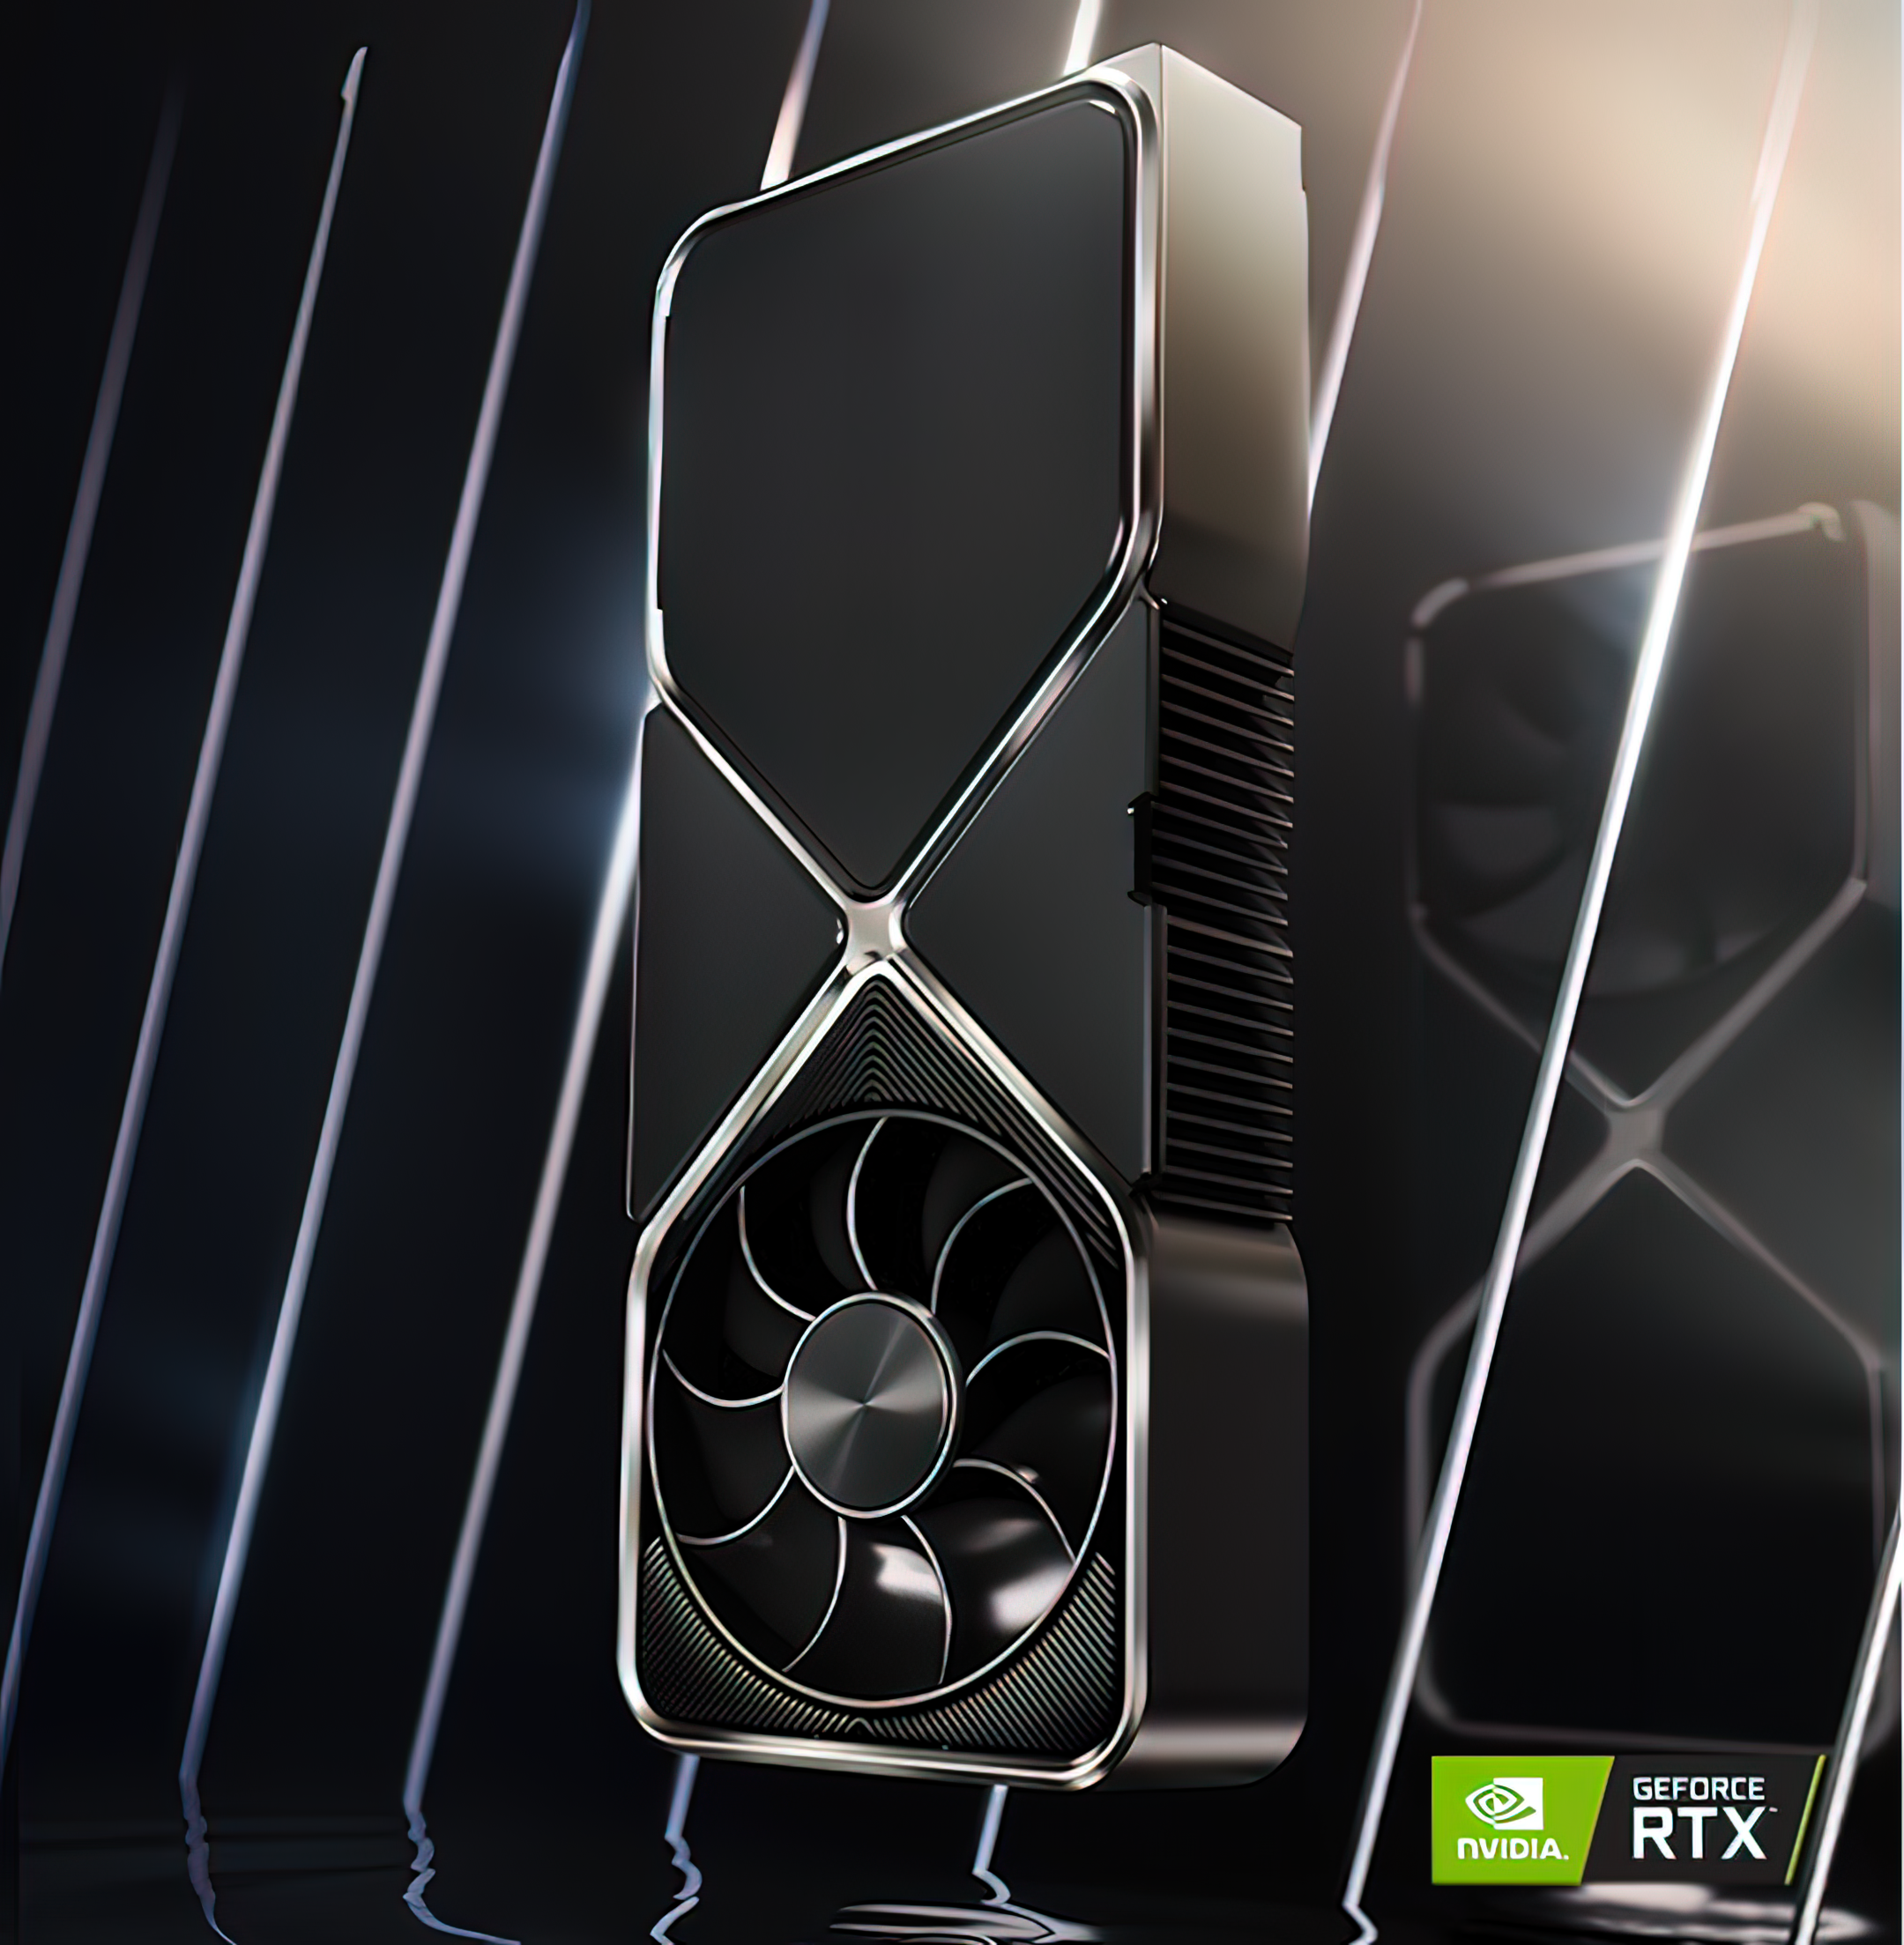 Alleged NVIDIA GeForce RTX 4090 Ti Founders Edition Graphics Card Cooler Pictured: Massive Cooling Design With Huge Heatsink, Baseplate With Both GPU & Memory Coverage